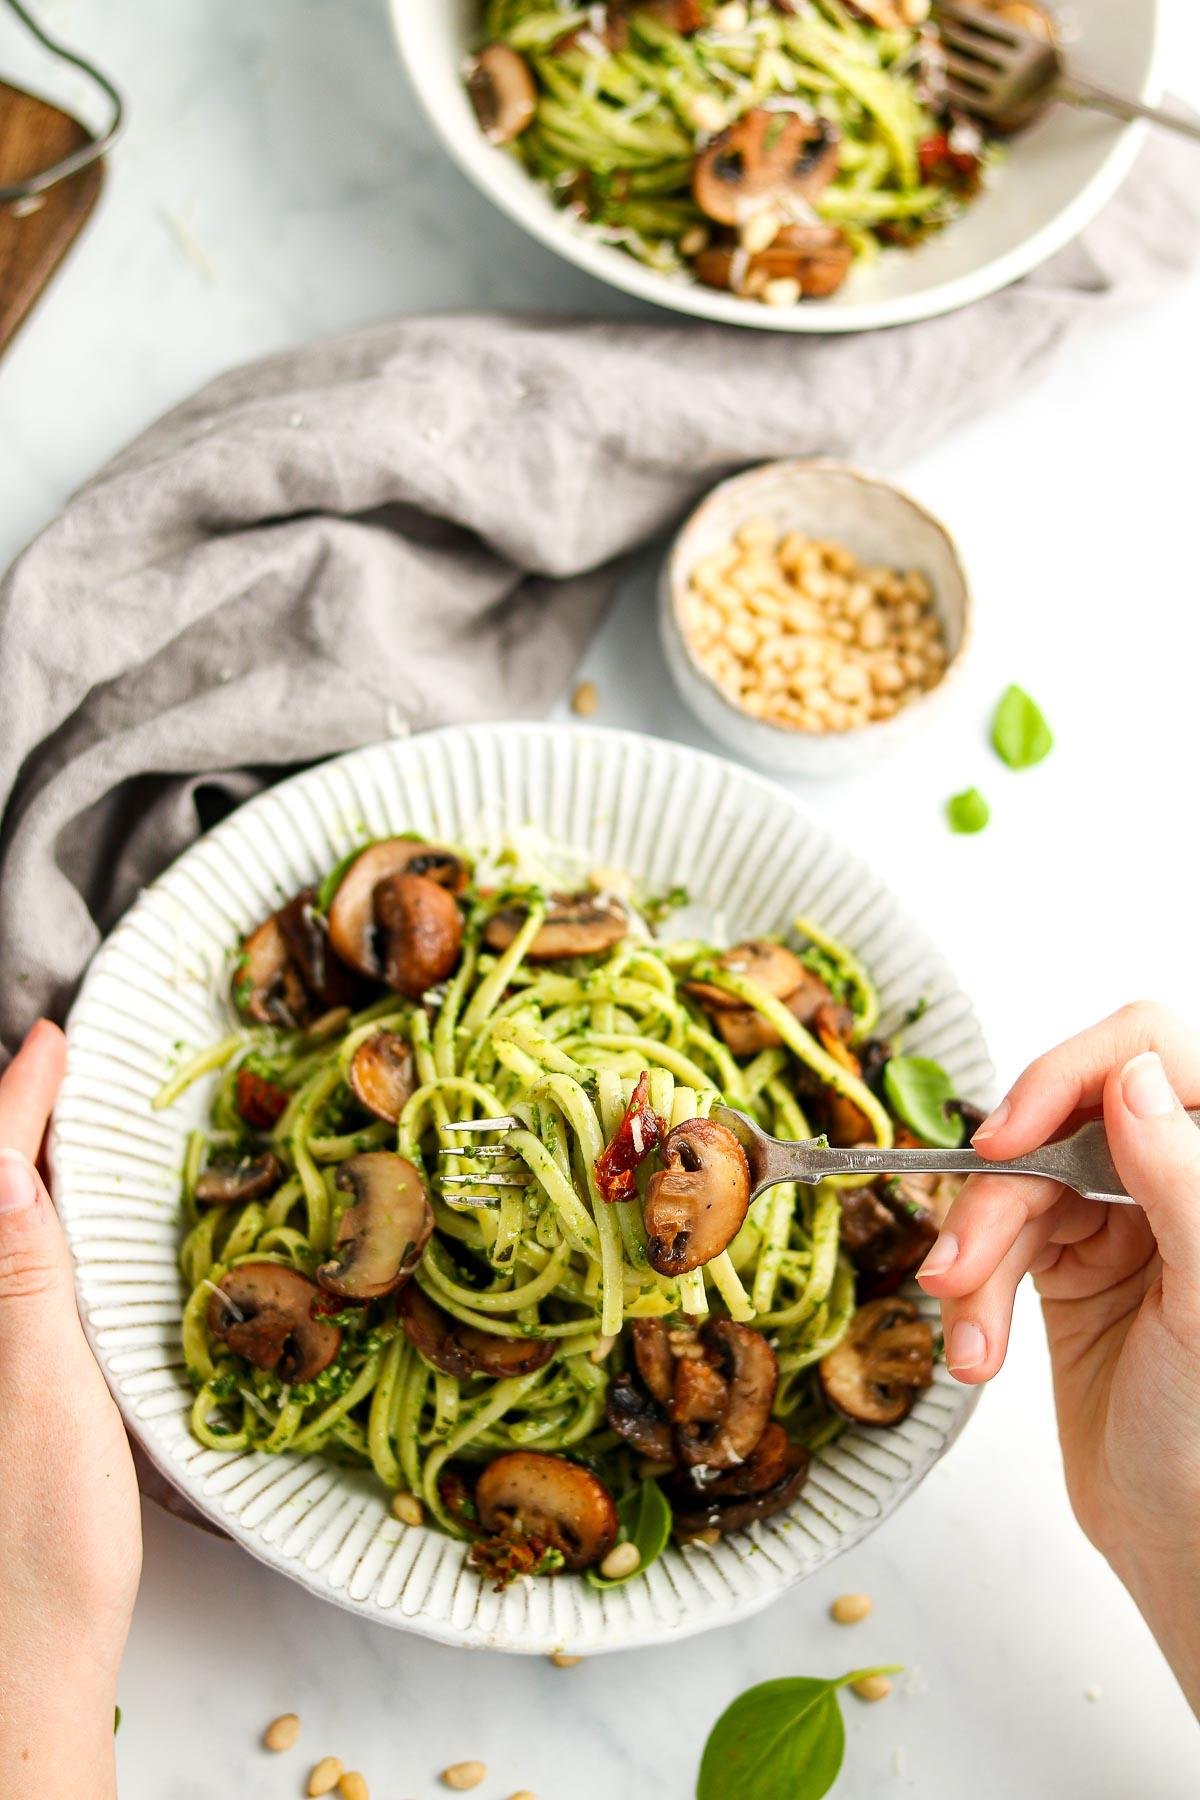 Spice up your week with this mouth-watering mushroom and pesto pasta recipe!